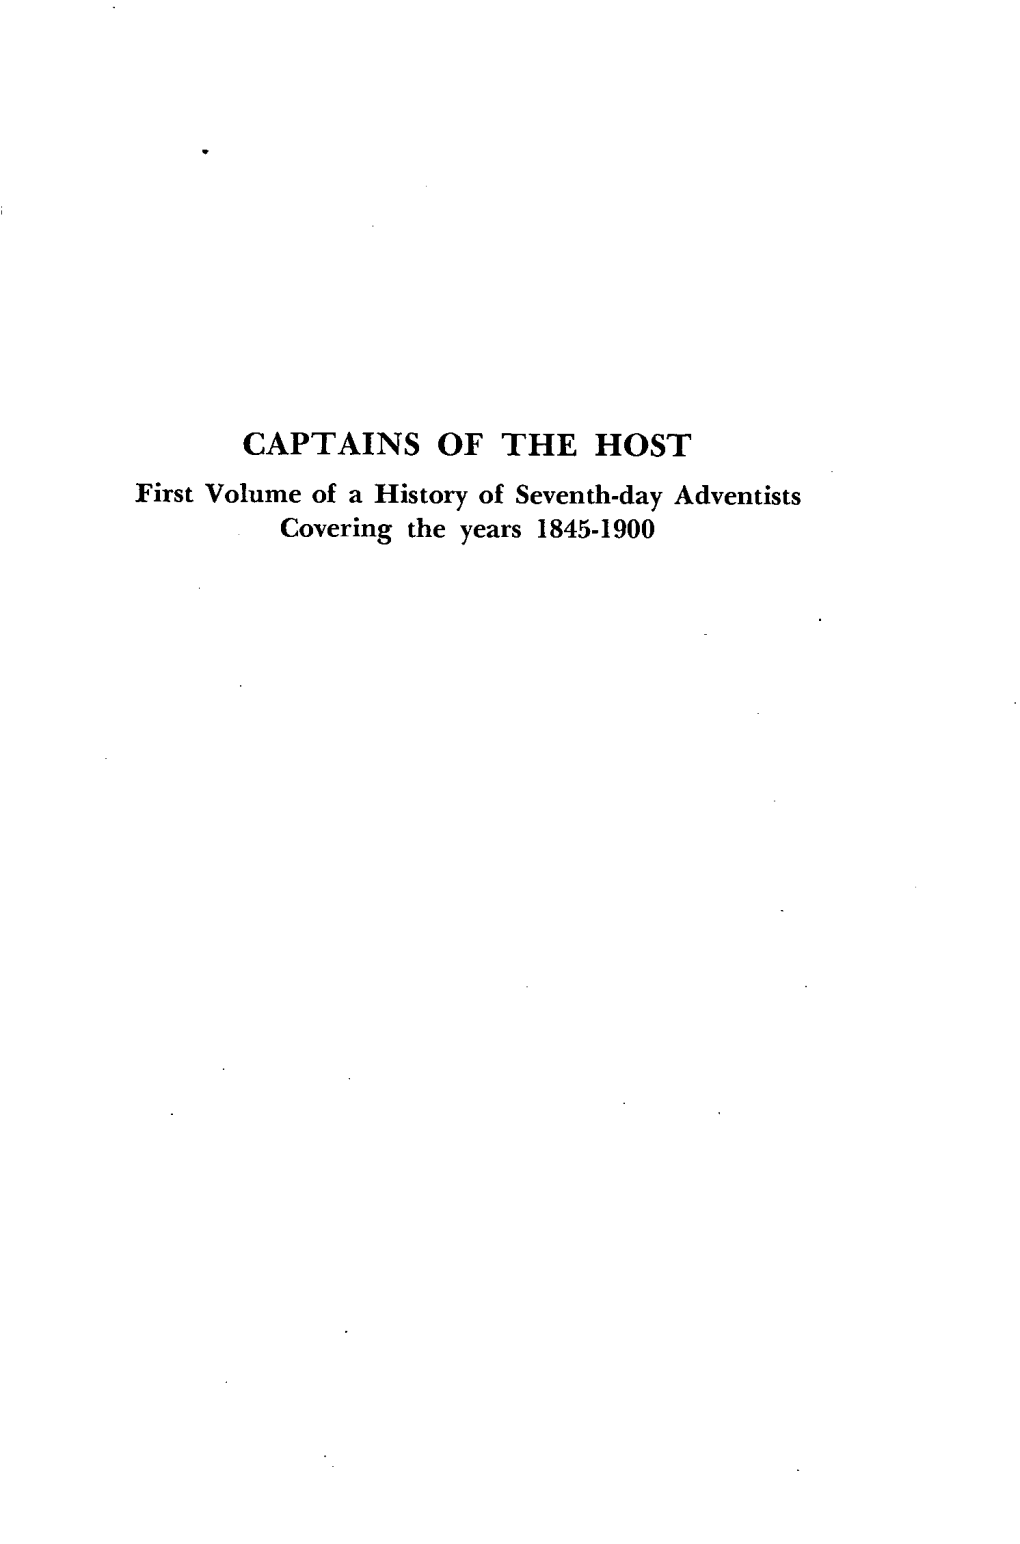 Captains of the Host